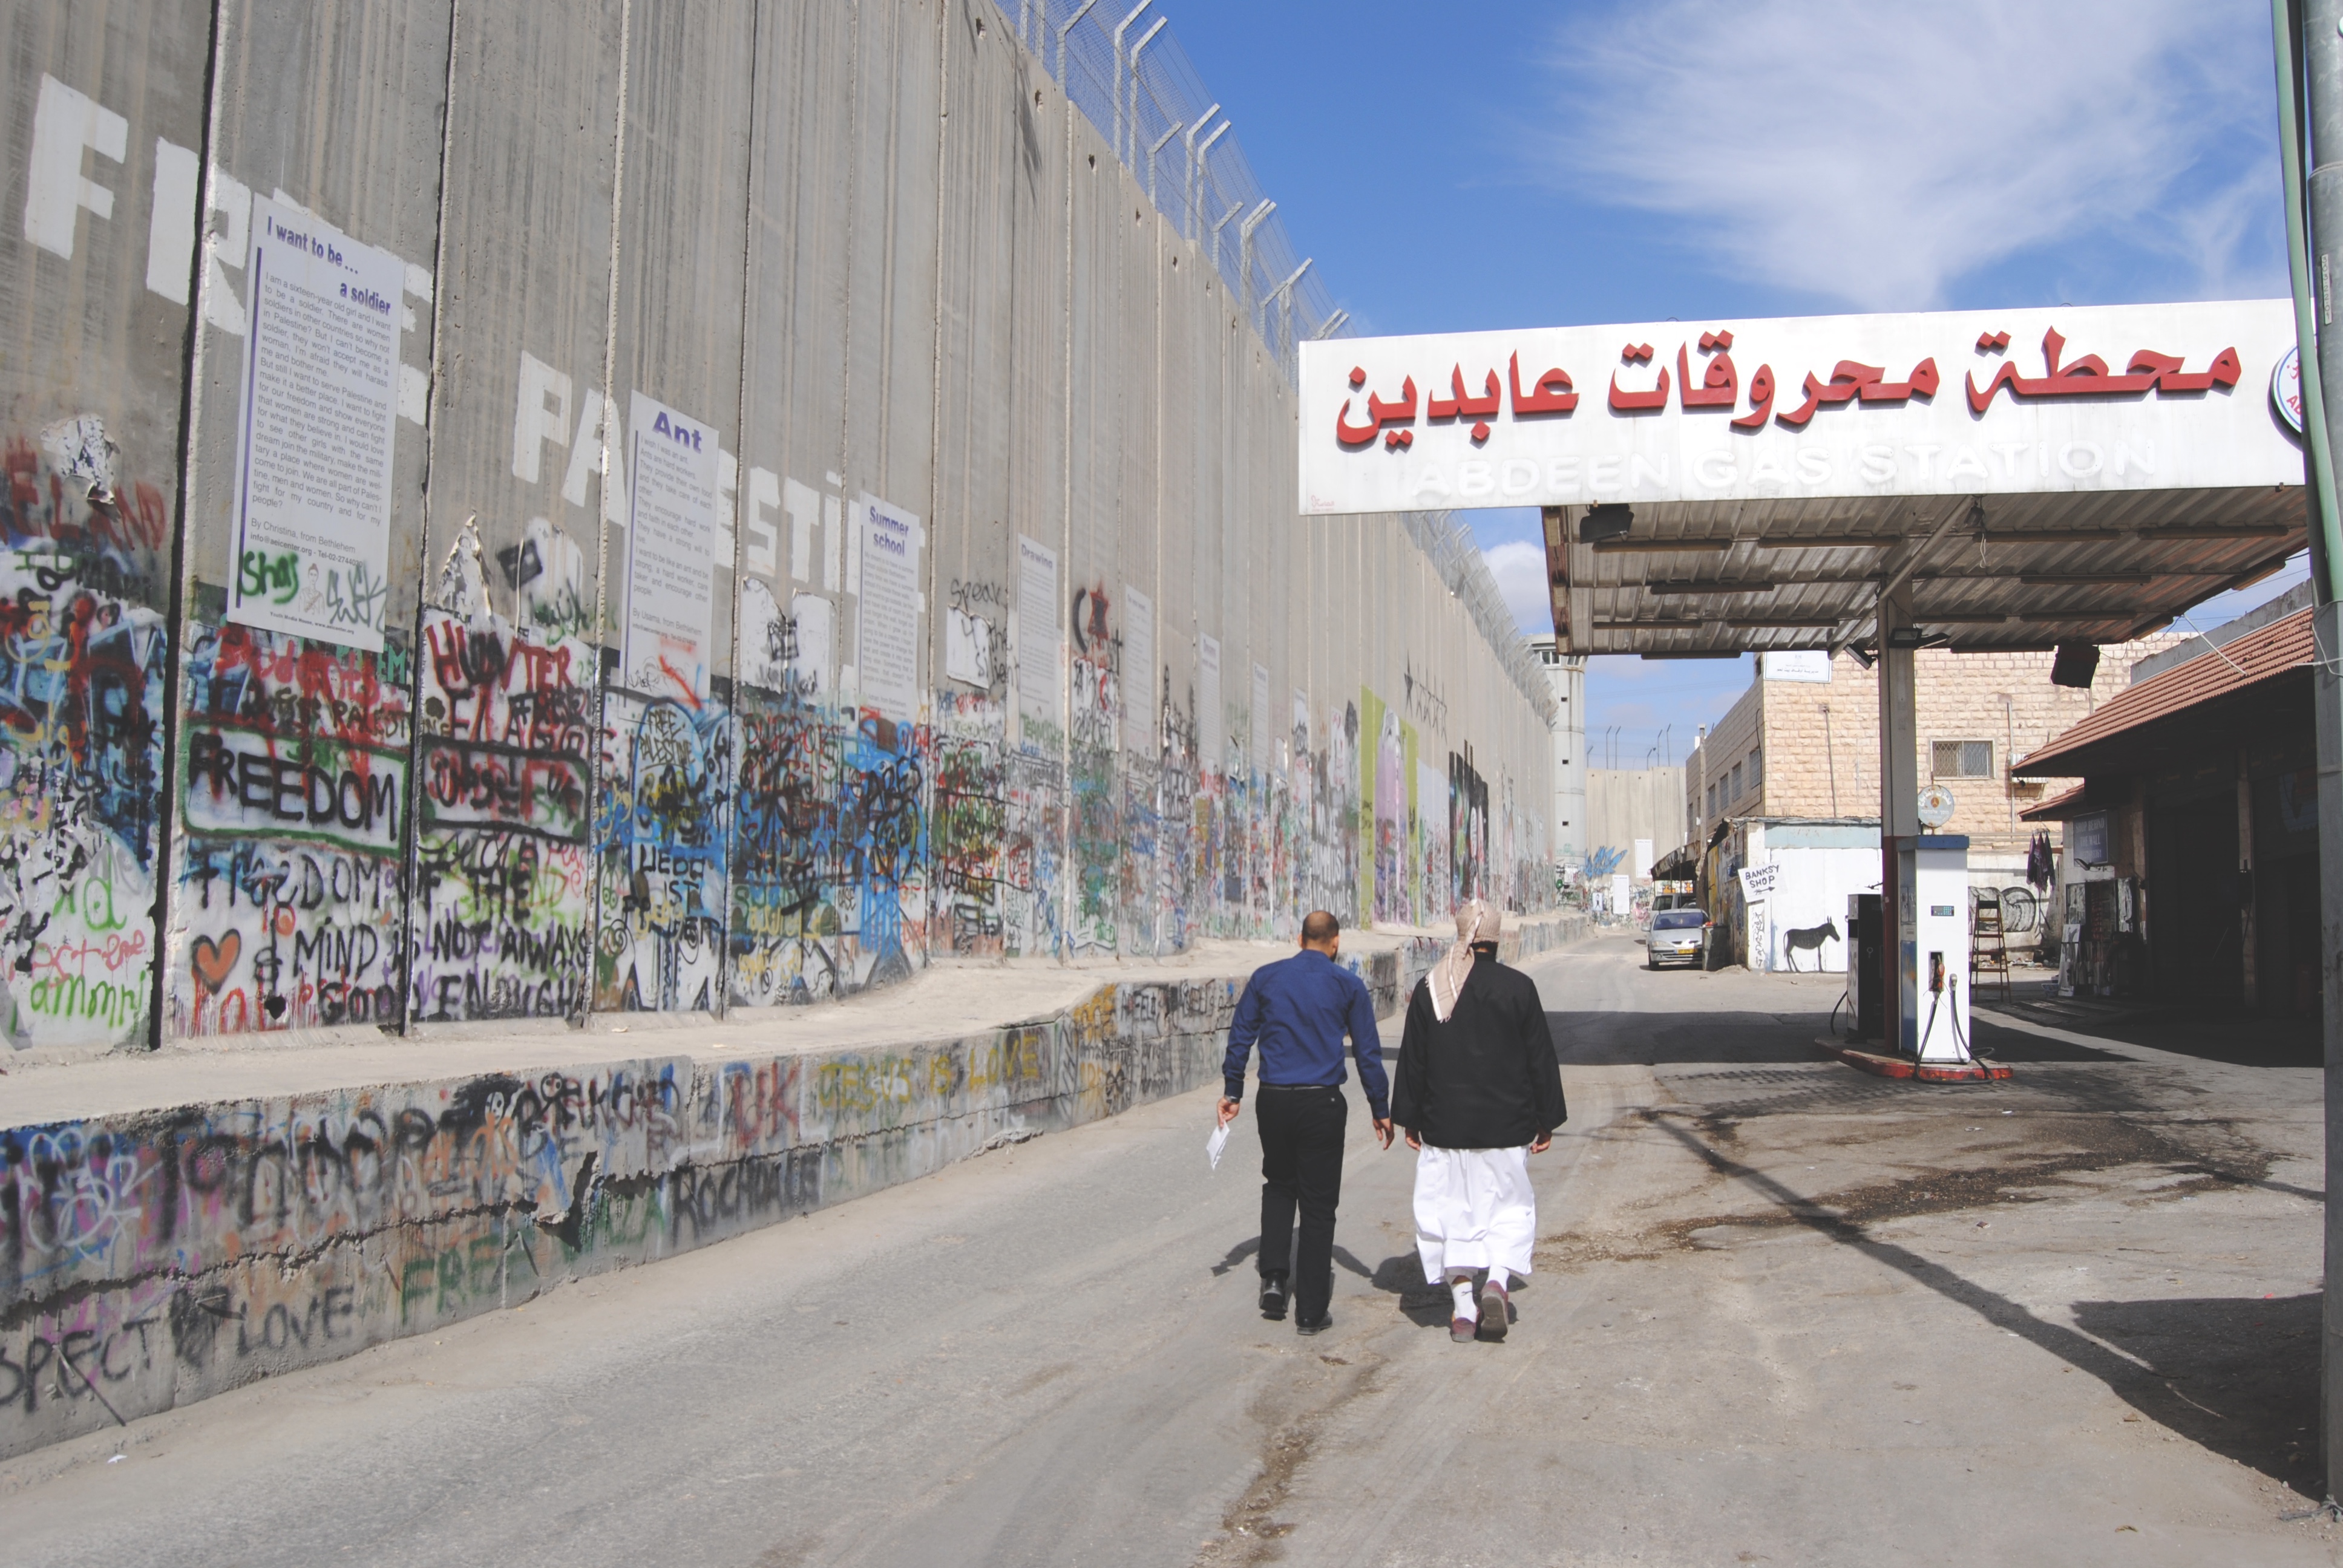 Israel West Bank Barrier seen in Bethlehem: A clear example of the ill-effects of spatial segregation